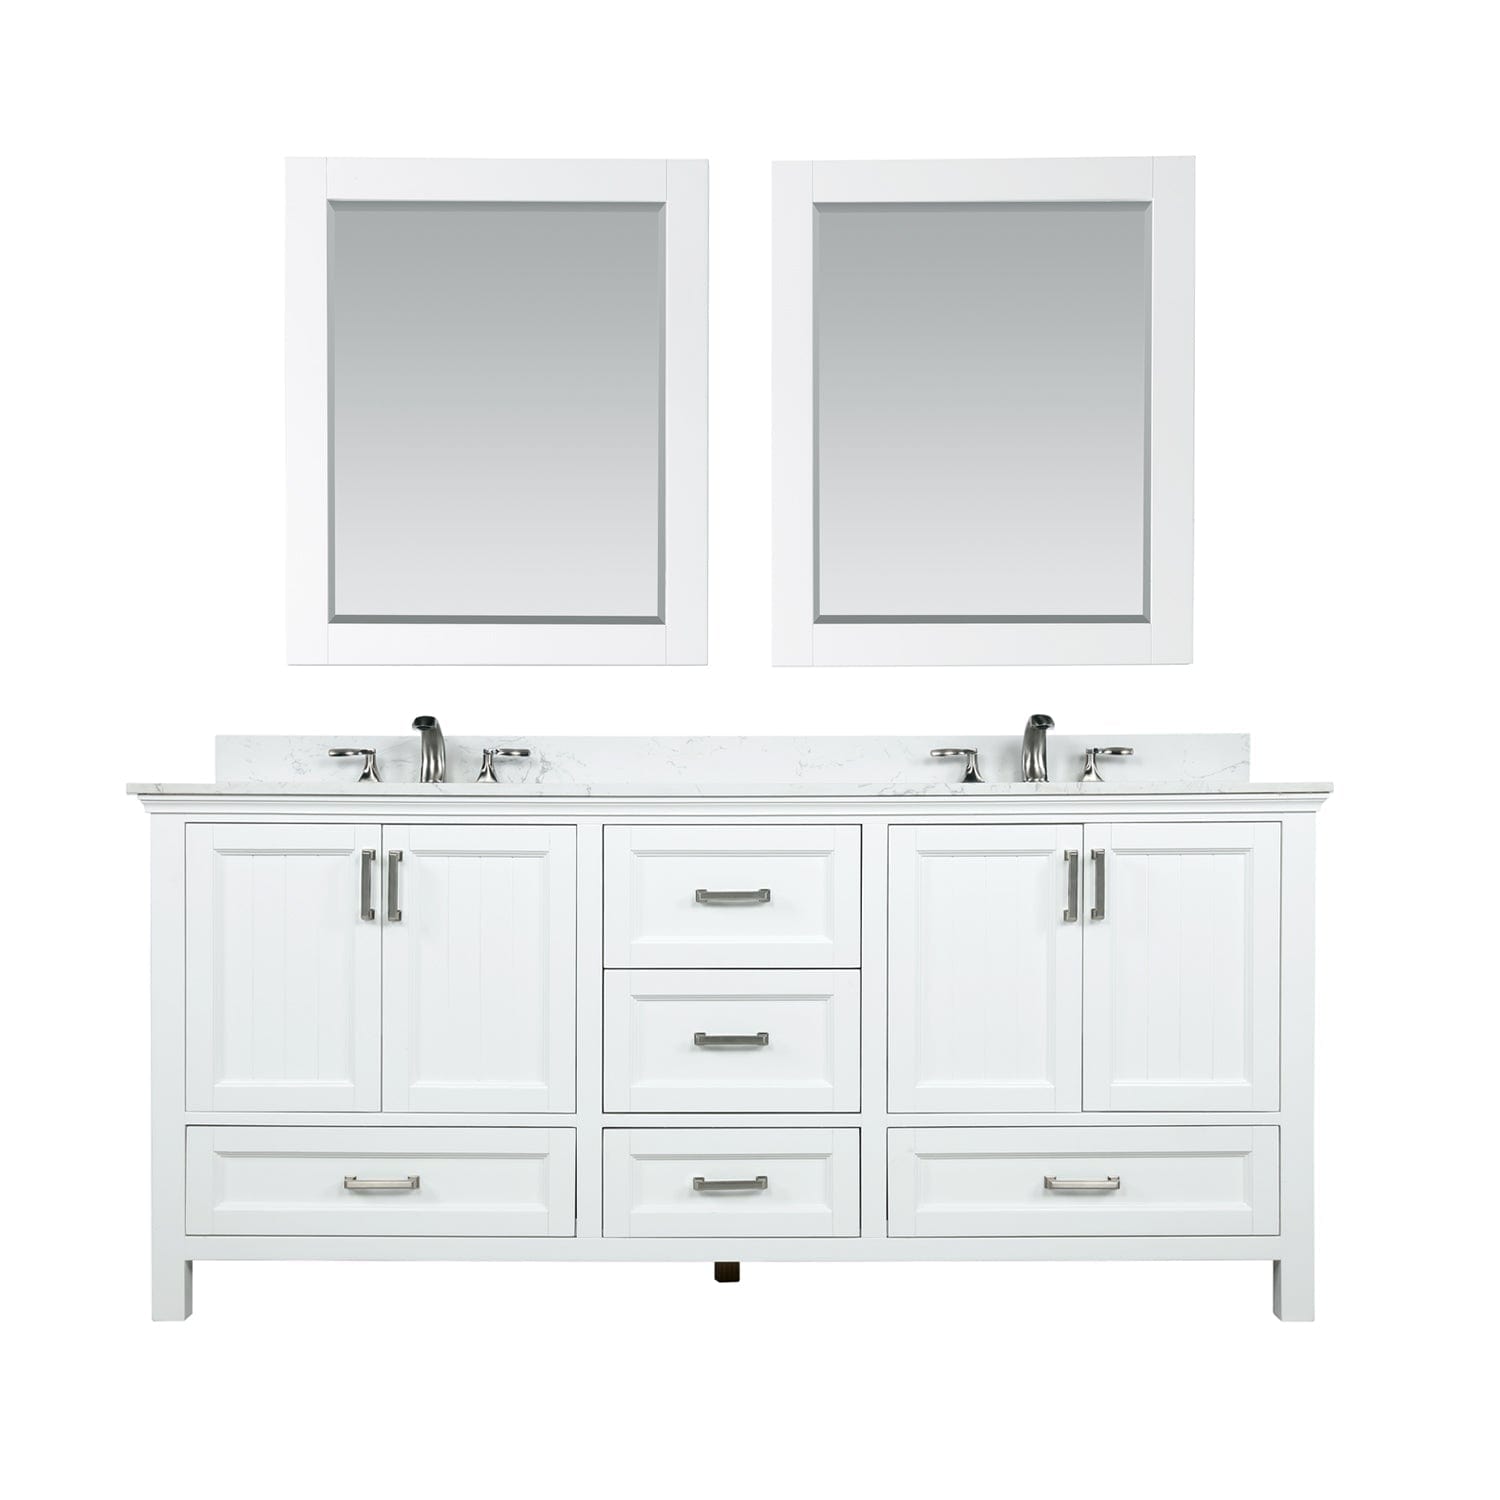 Altair Isla 72" Double Bathroom Vanity Set in White and Carrara White Marble Countertop with Mirror 538072-WH-AW - Molaix696952511376Vanity538072-WH-AW